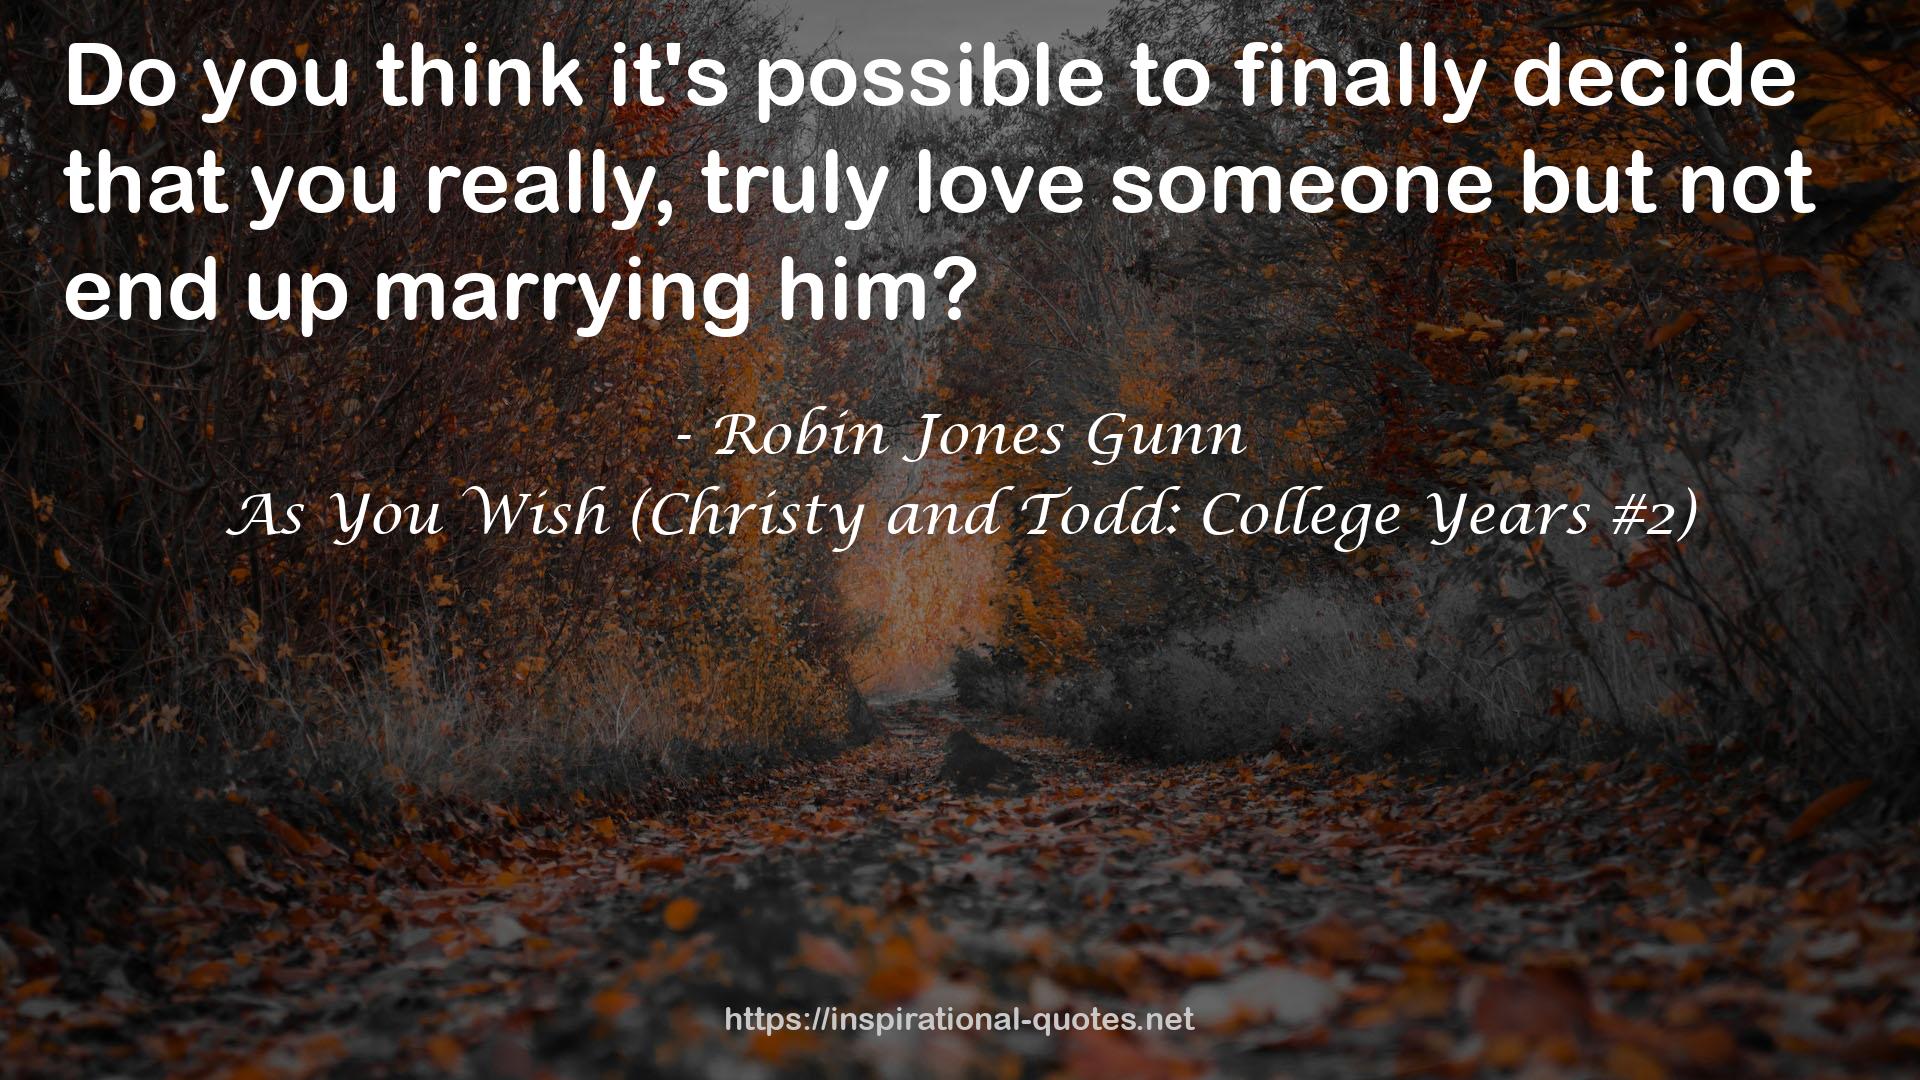 As You Wish (Christy and Todd: College Years #2) QUOTES